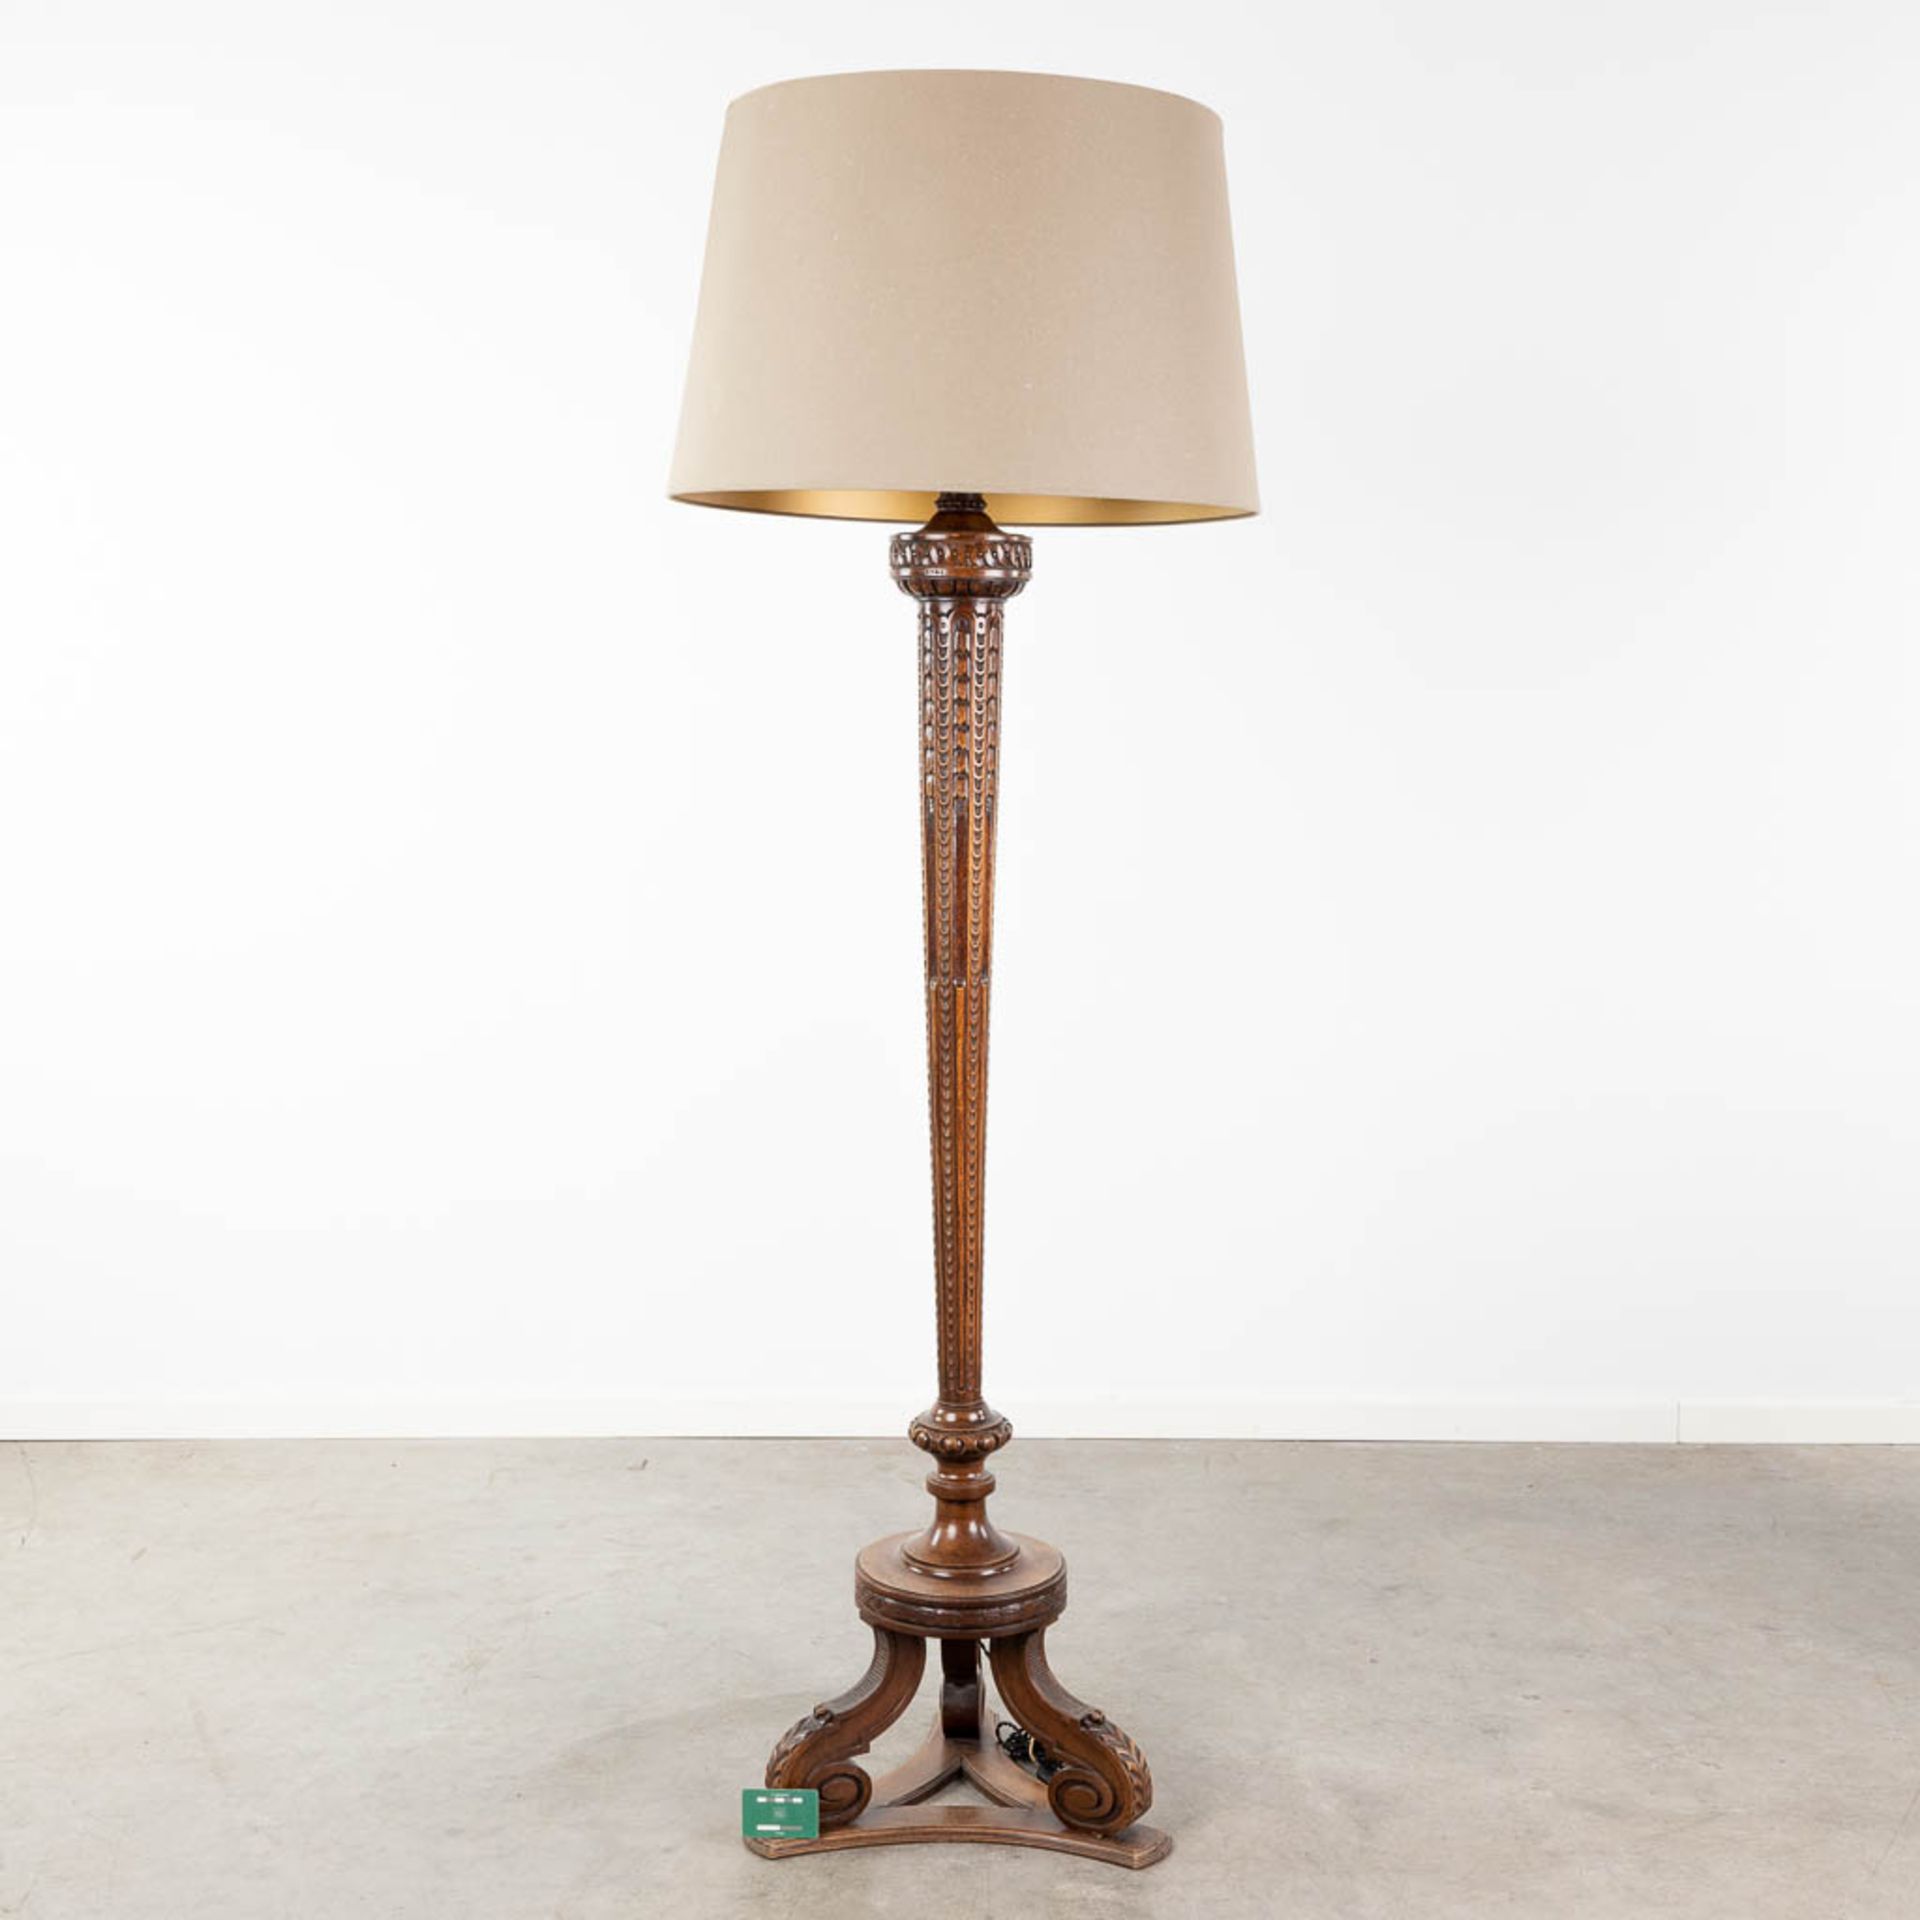 A wood sculptured standing lamp, circa 1920. (L:42 x W:42 x H:188 cm) - Image 2 of 11